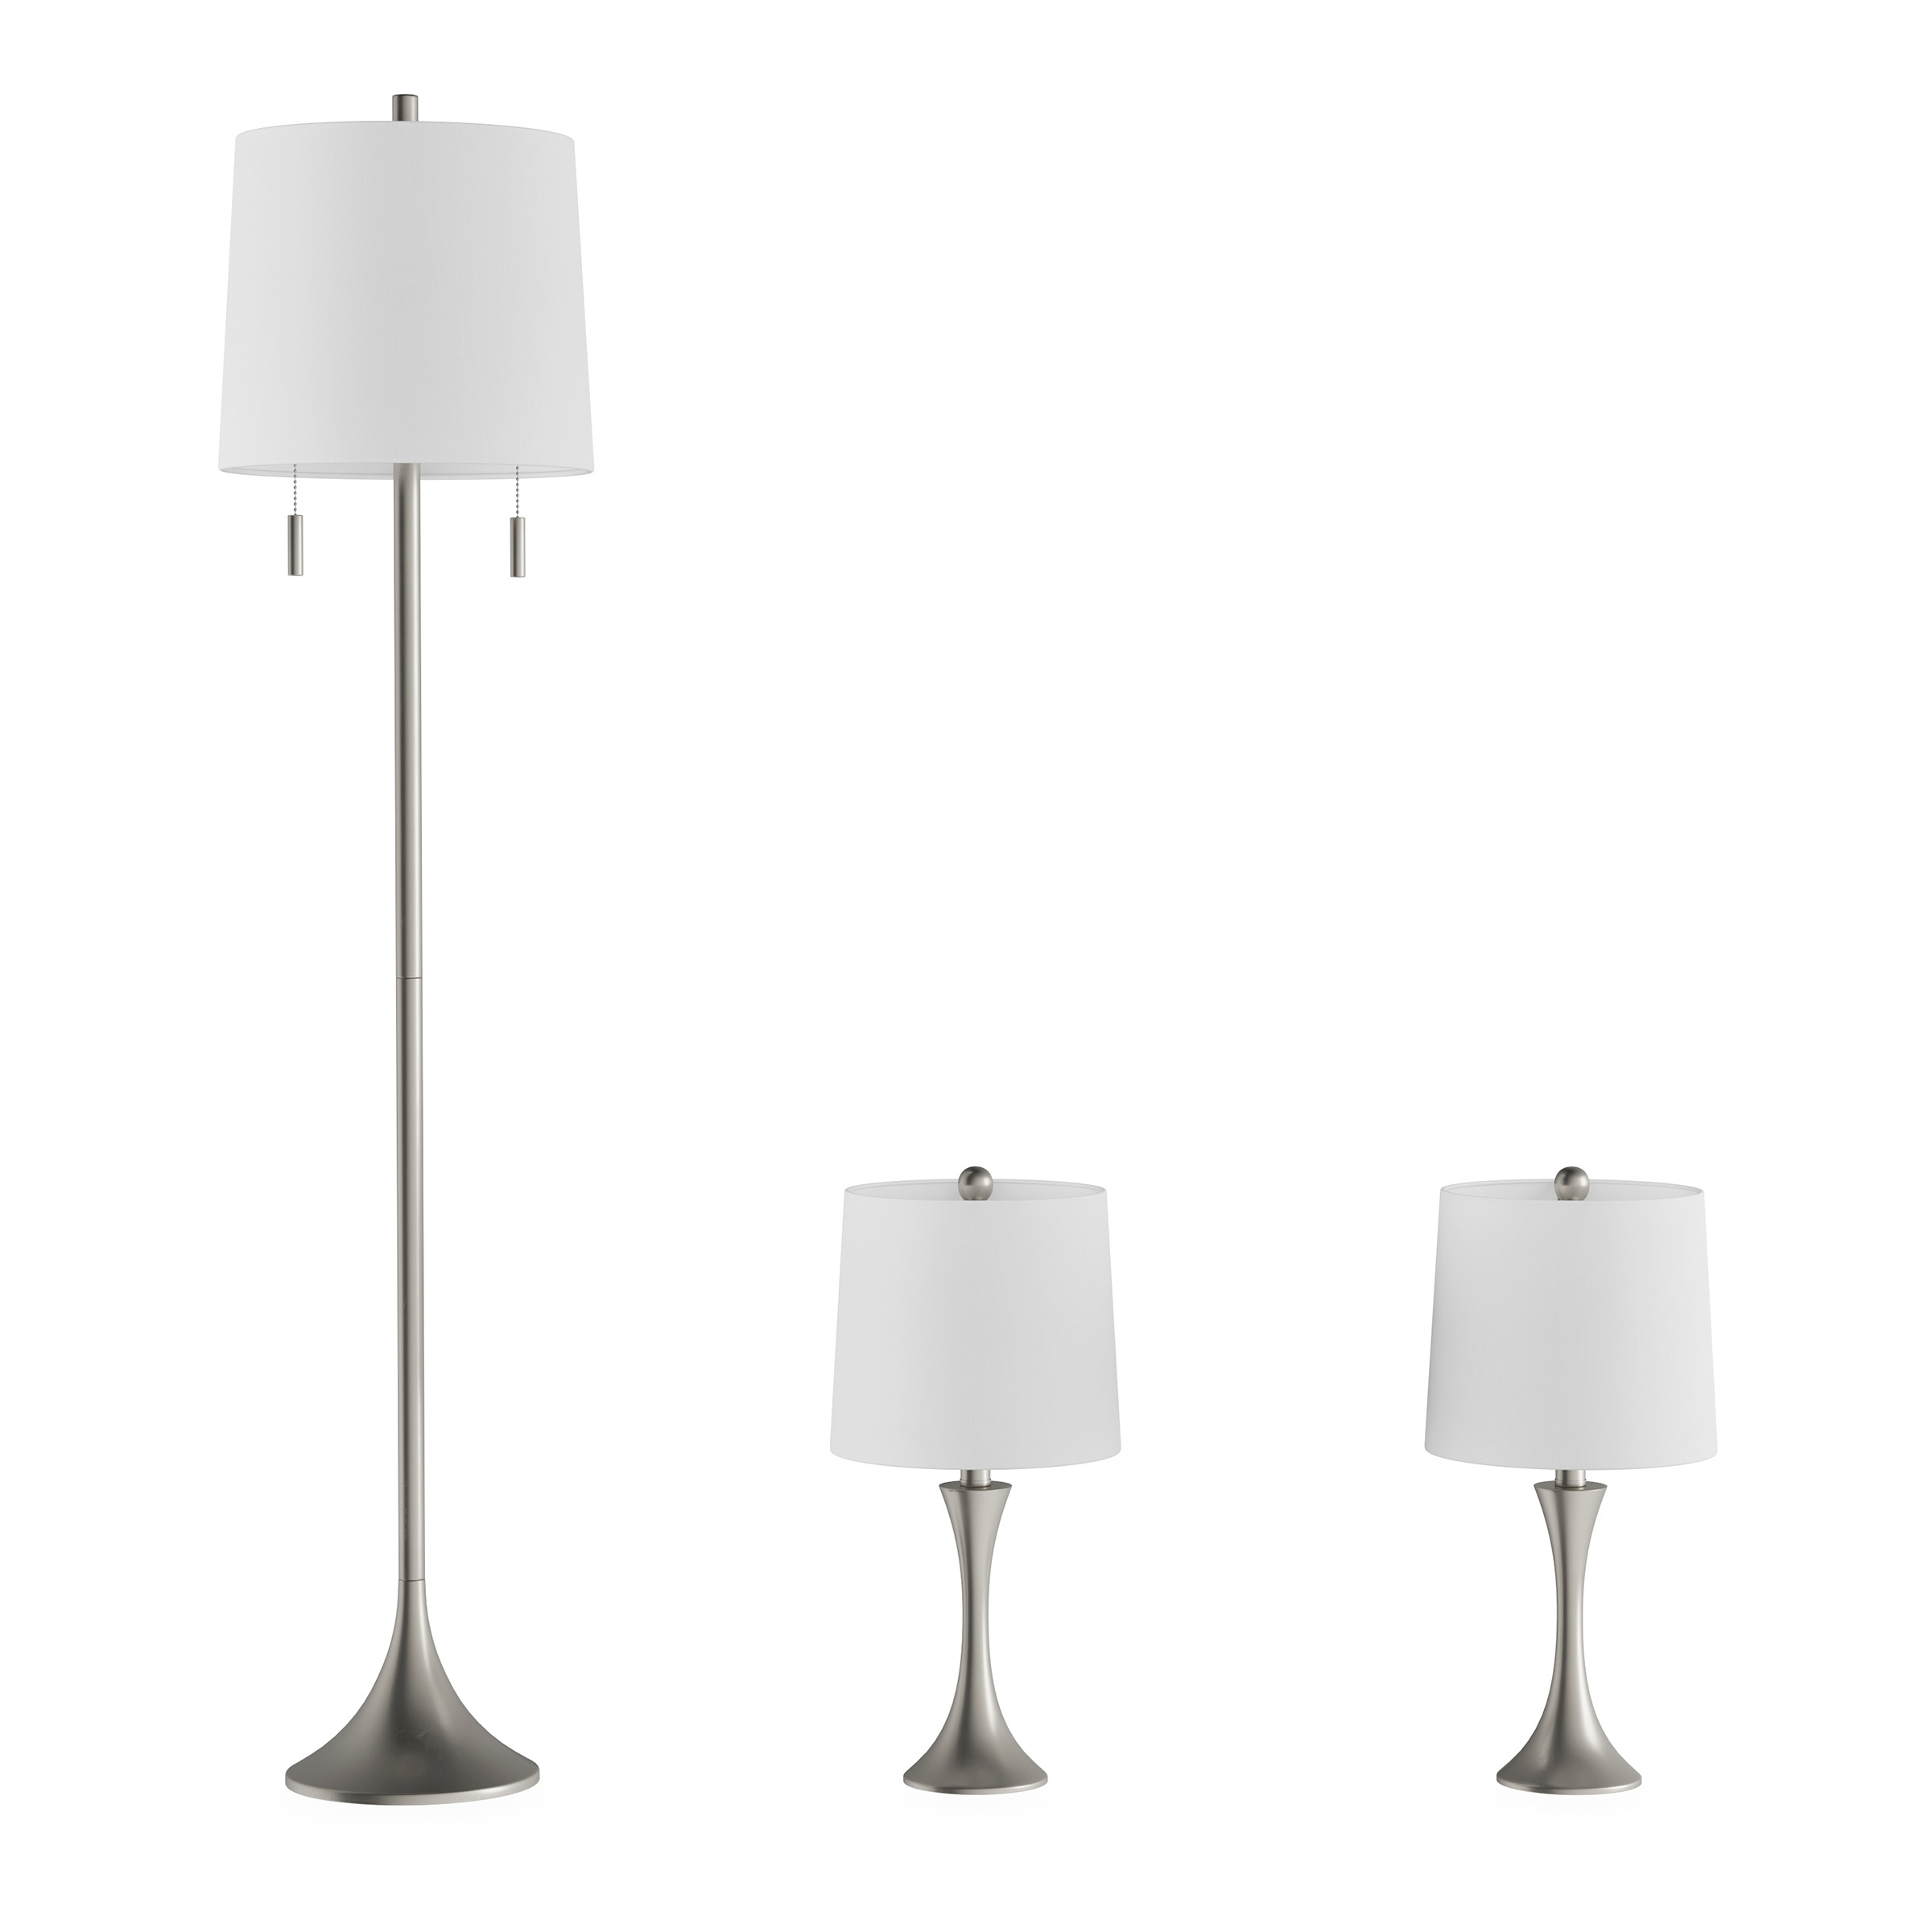 Table And Floor Lamps â Set Of 3 Mid-Century Modern Metal Flared Trumpet Base With Energy Efficient LED Light Bulbs Included - Bronze